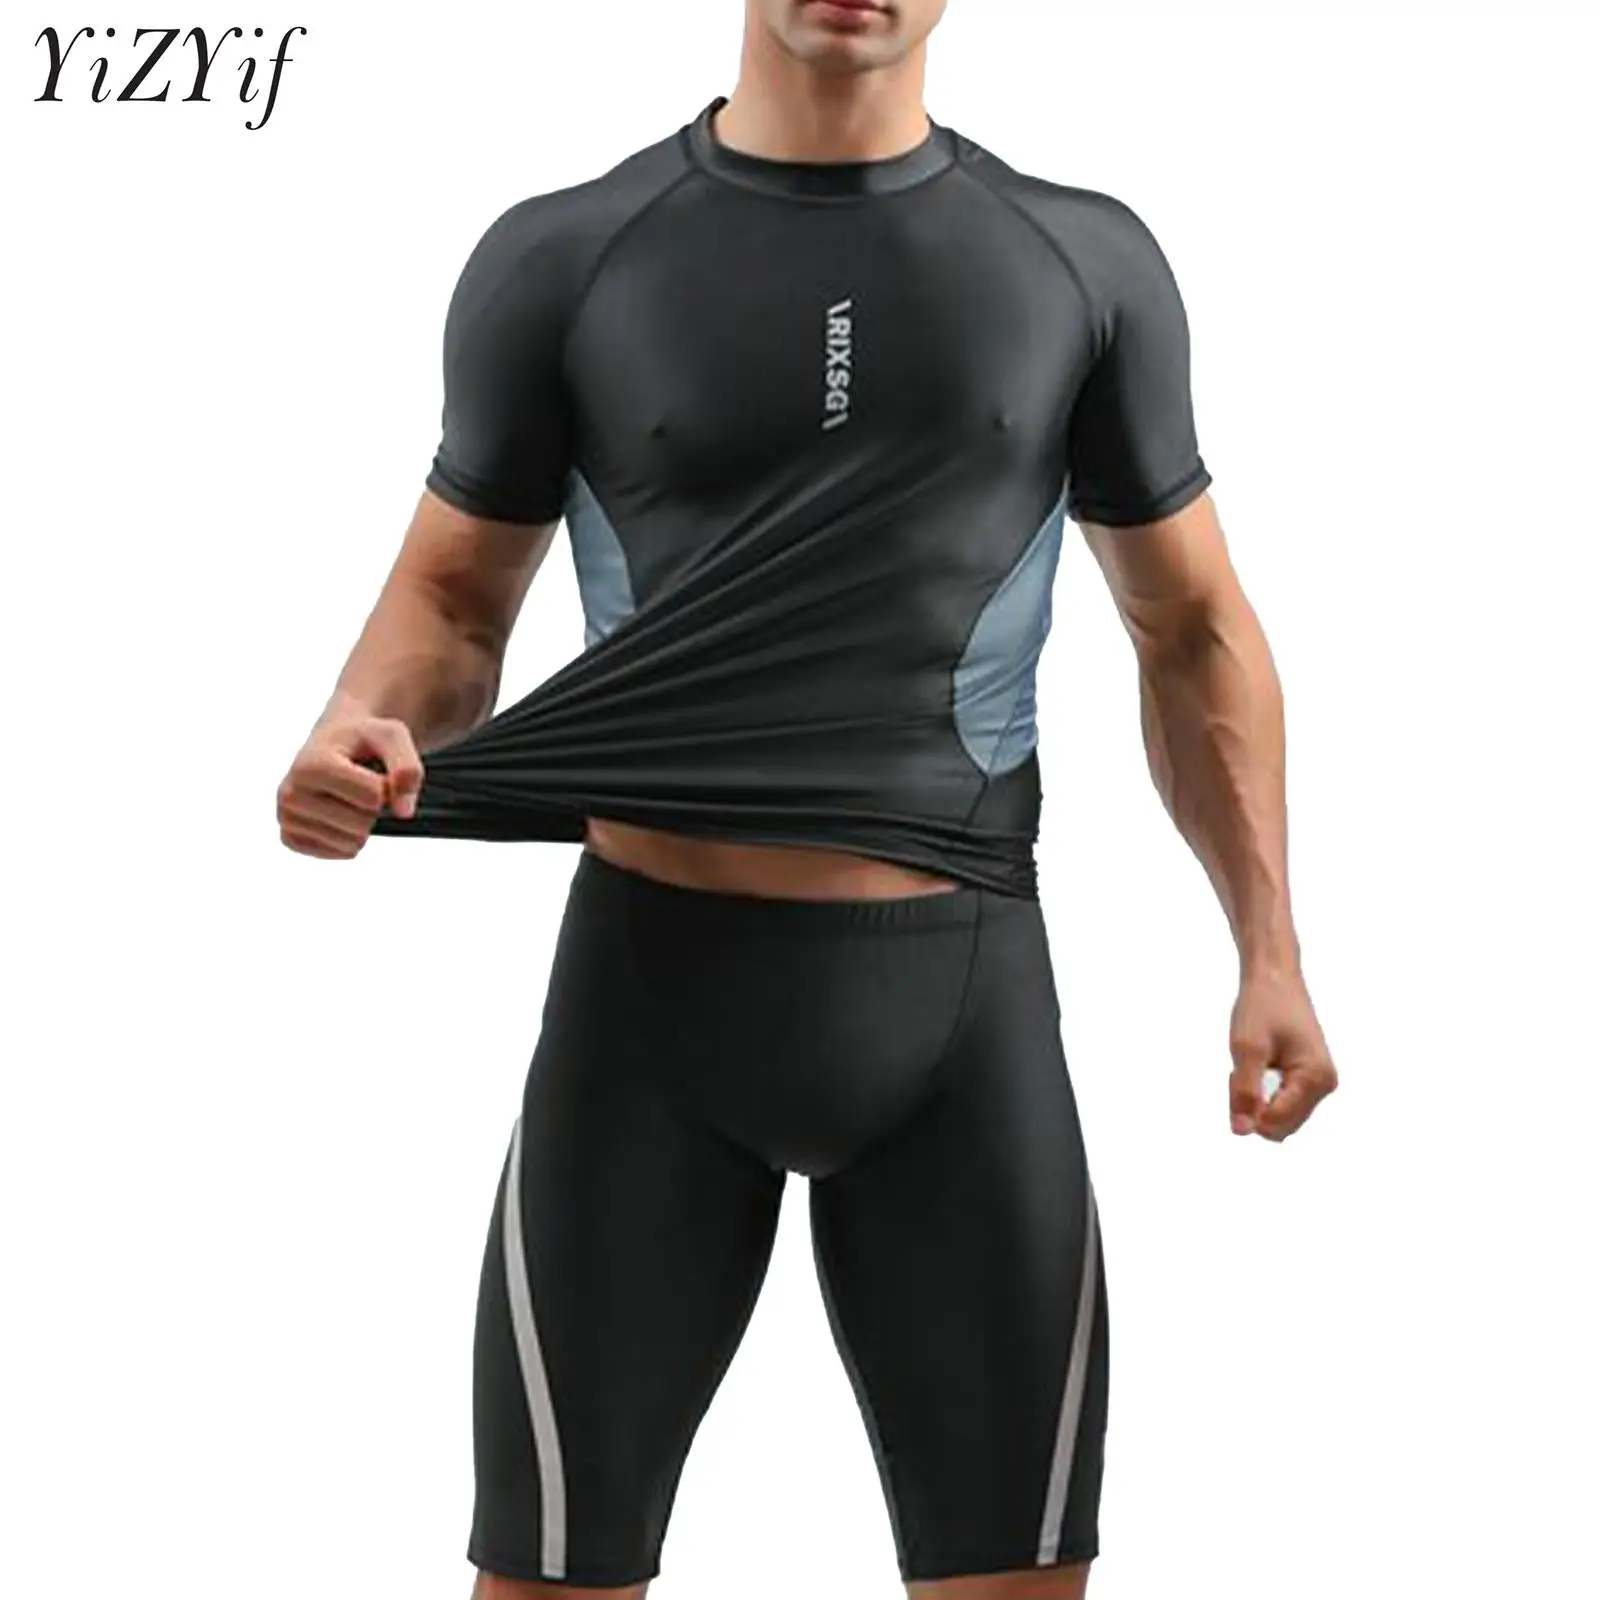 

Men 2Pcs Sport Quick Dry Outfit Short Sleeve Top and Shorts Tankini Swimwear Swimming Diving Surfing Gym Training Tracksuit Set